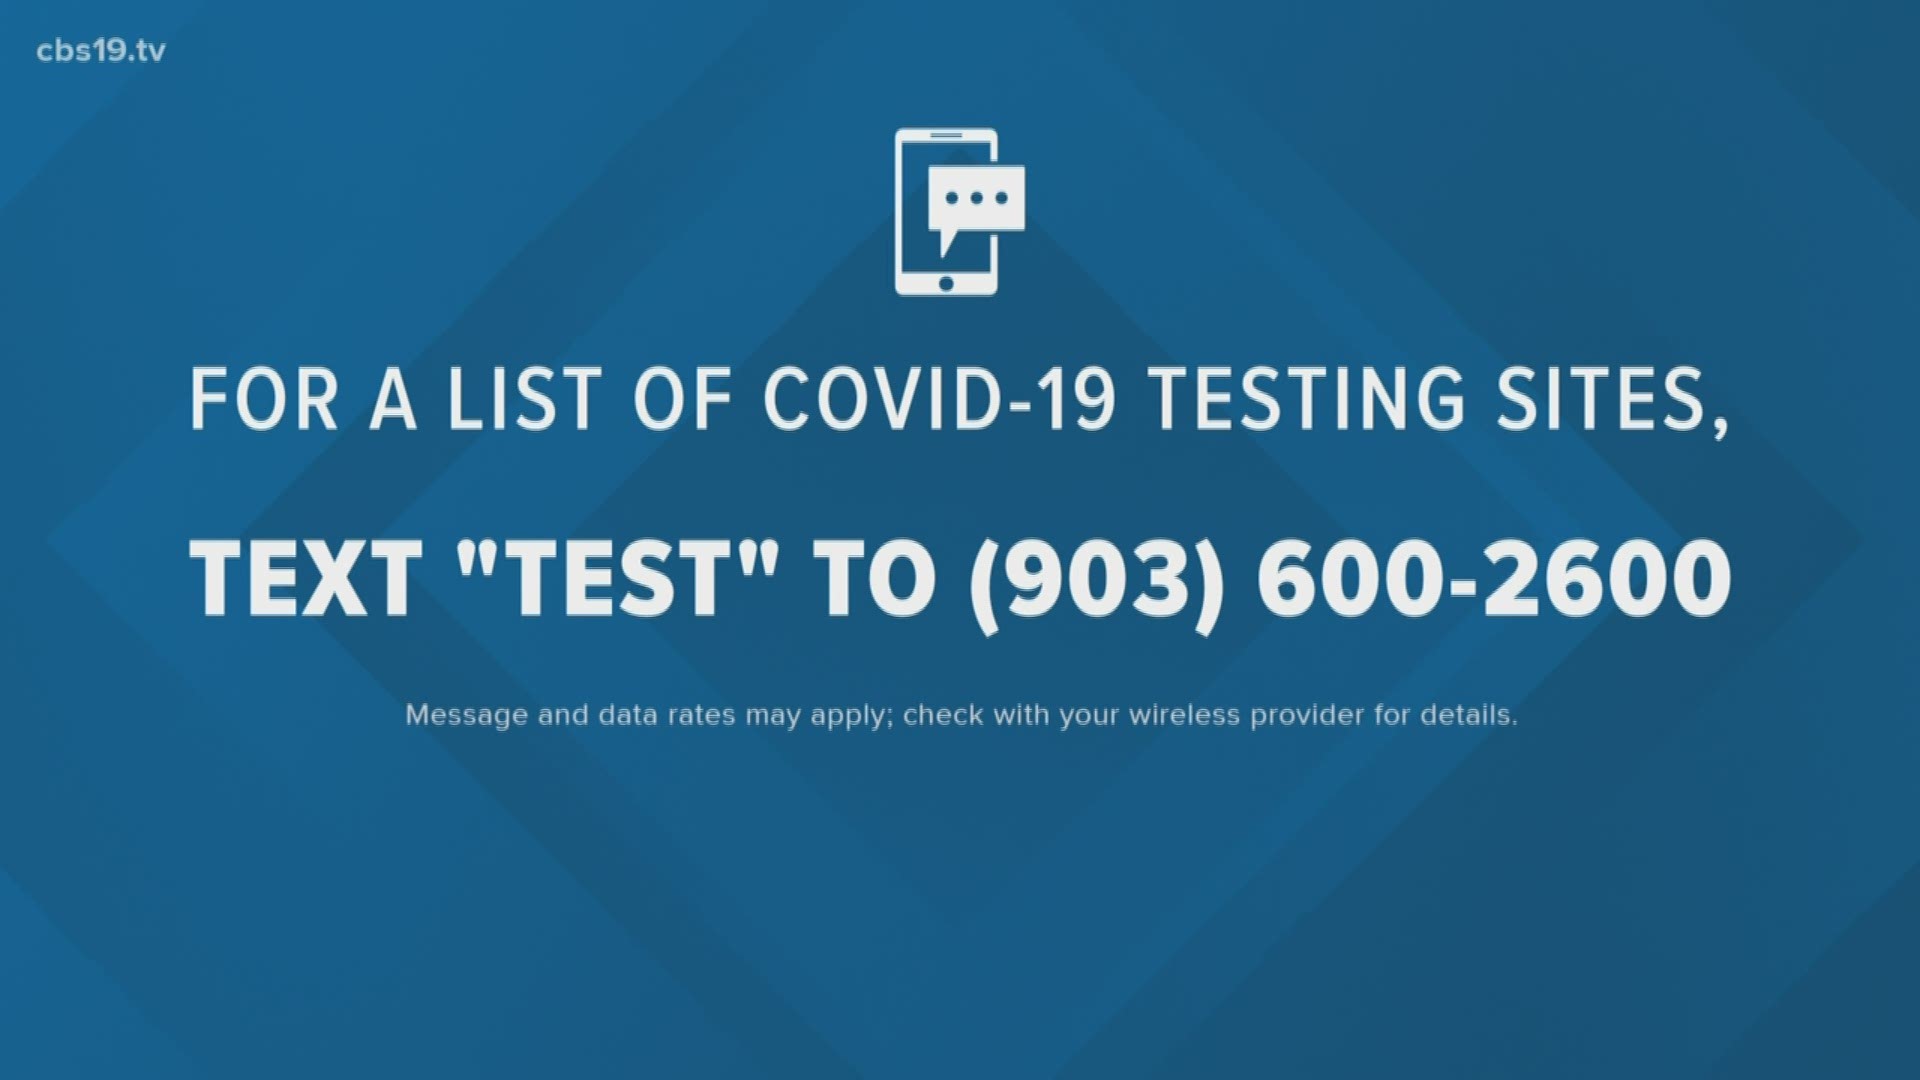 For a list of COVID-19 testing sites in East Texas, text "TEST" to (903) 600-2600.